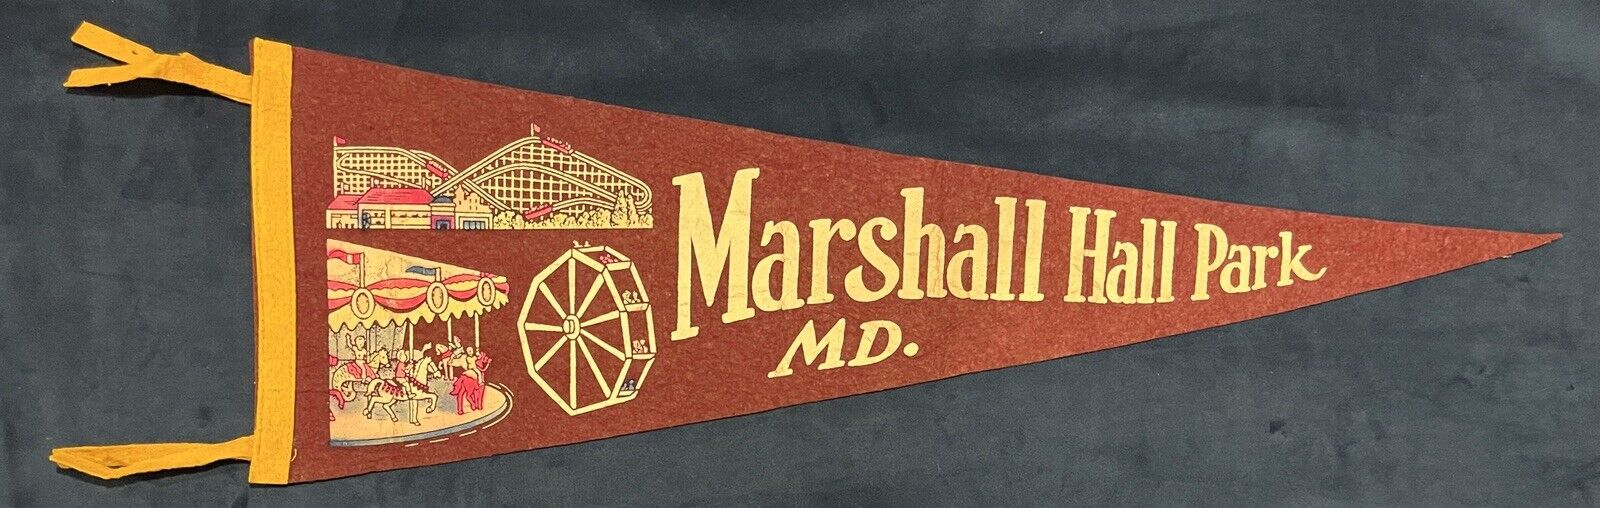 Rare Vintage Marshall Hall Park Maryland 26 In Pennant 1920-80 Charles County